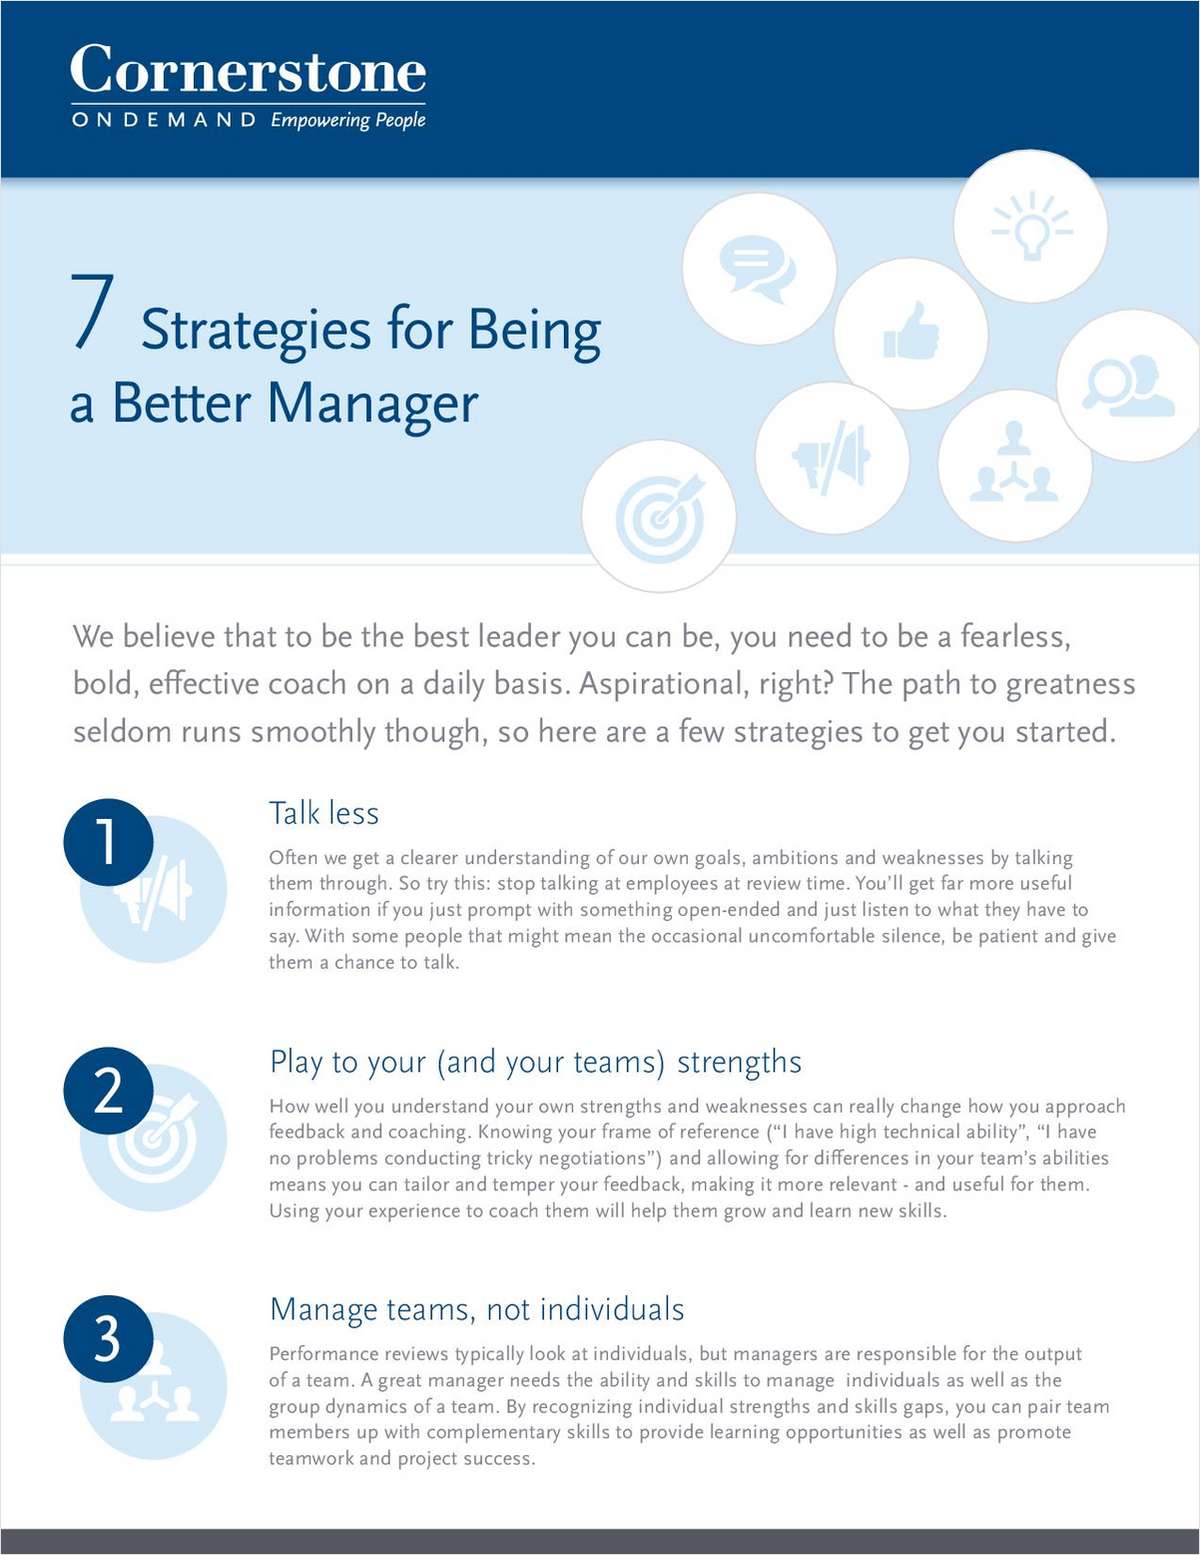 7 Strategies for Being a Better Manager